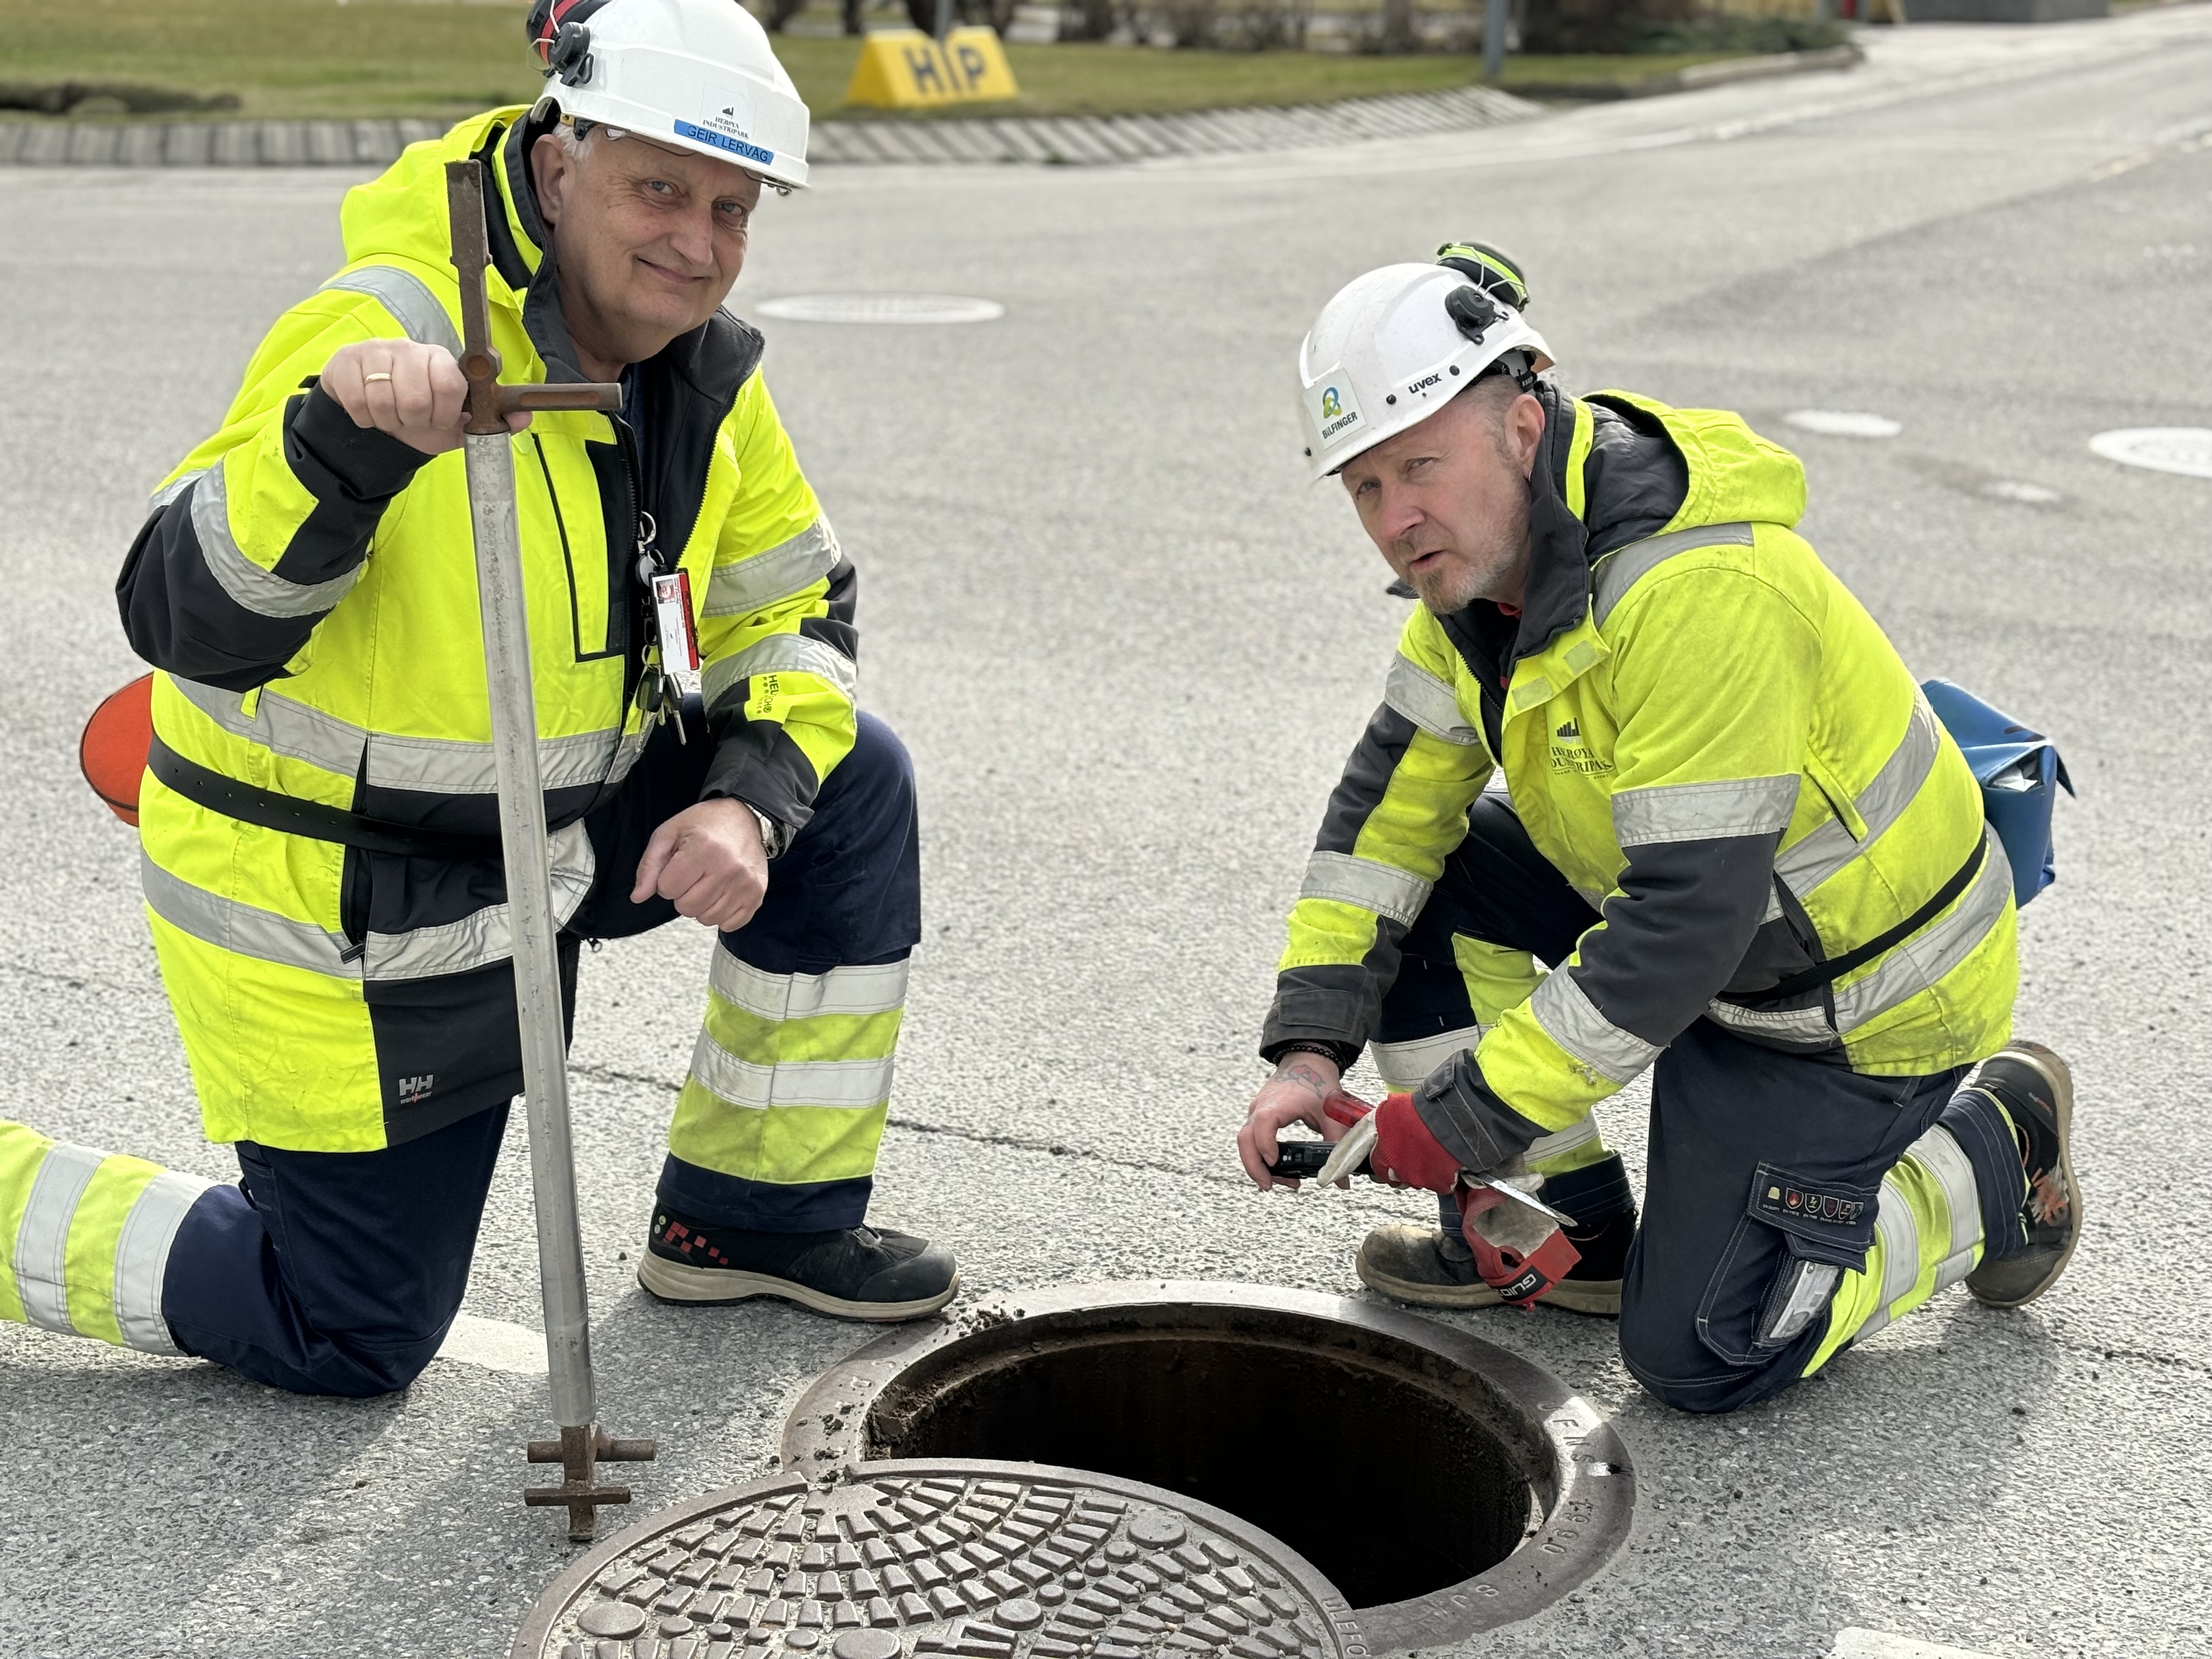 Two men are crouching by a manhole in the street, the manhole cover is next to them. One man is holding a crowbar that the manhole cover is opened with, the other is using a camera down into the manhole and taking a picture.